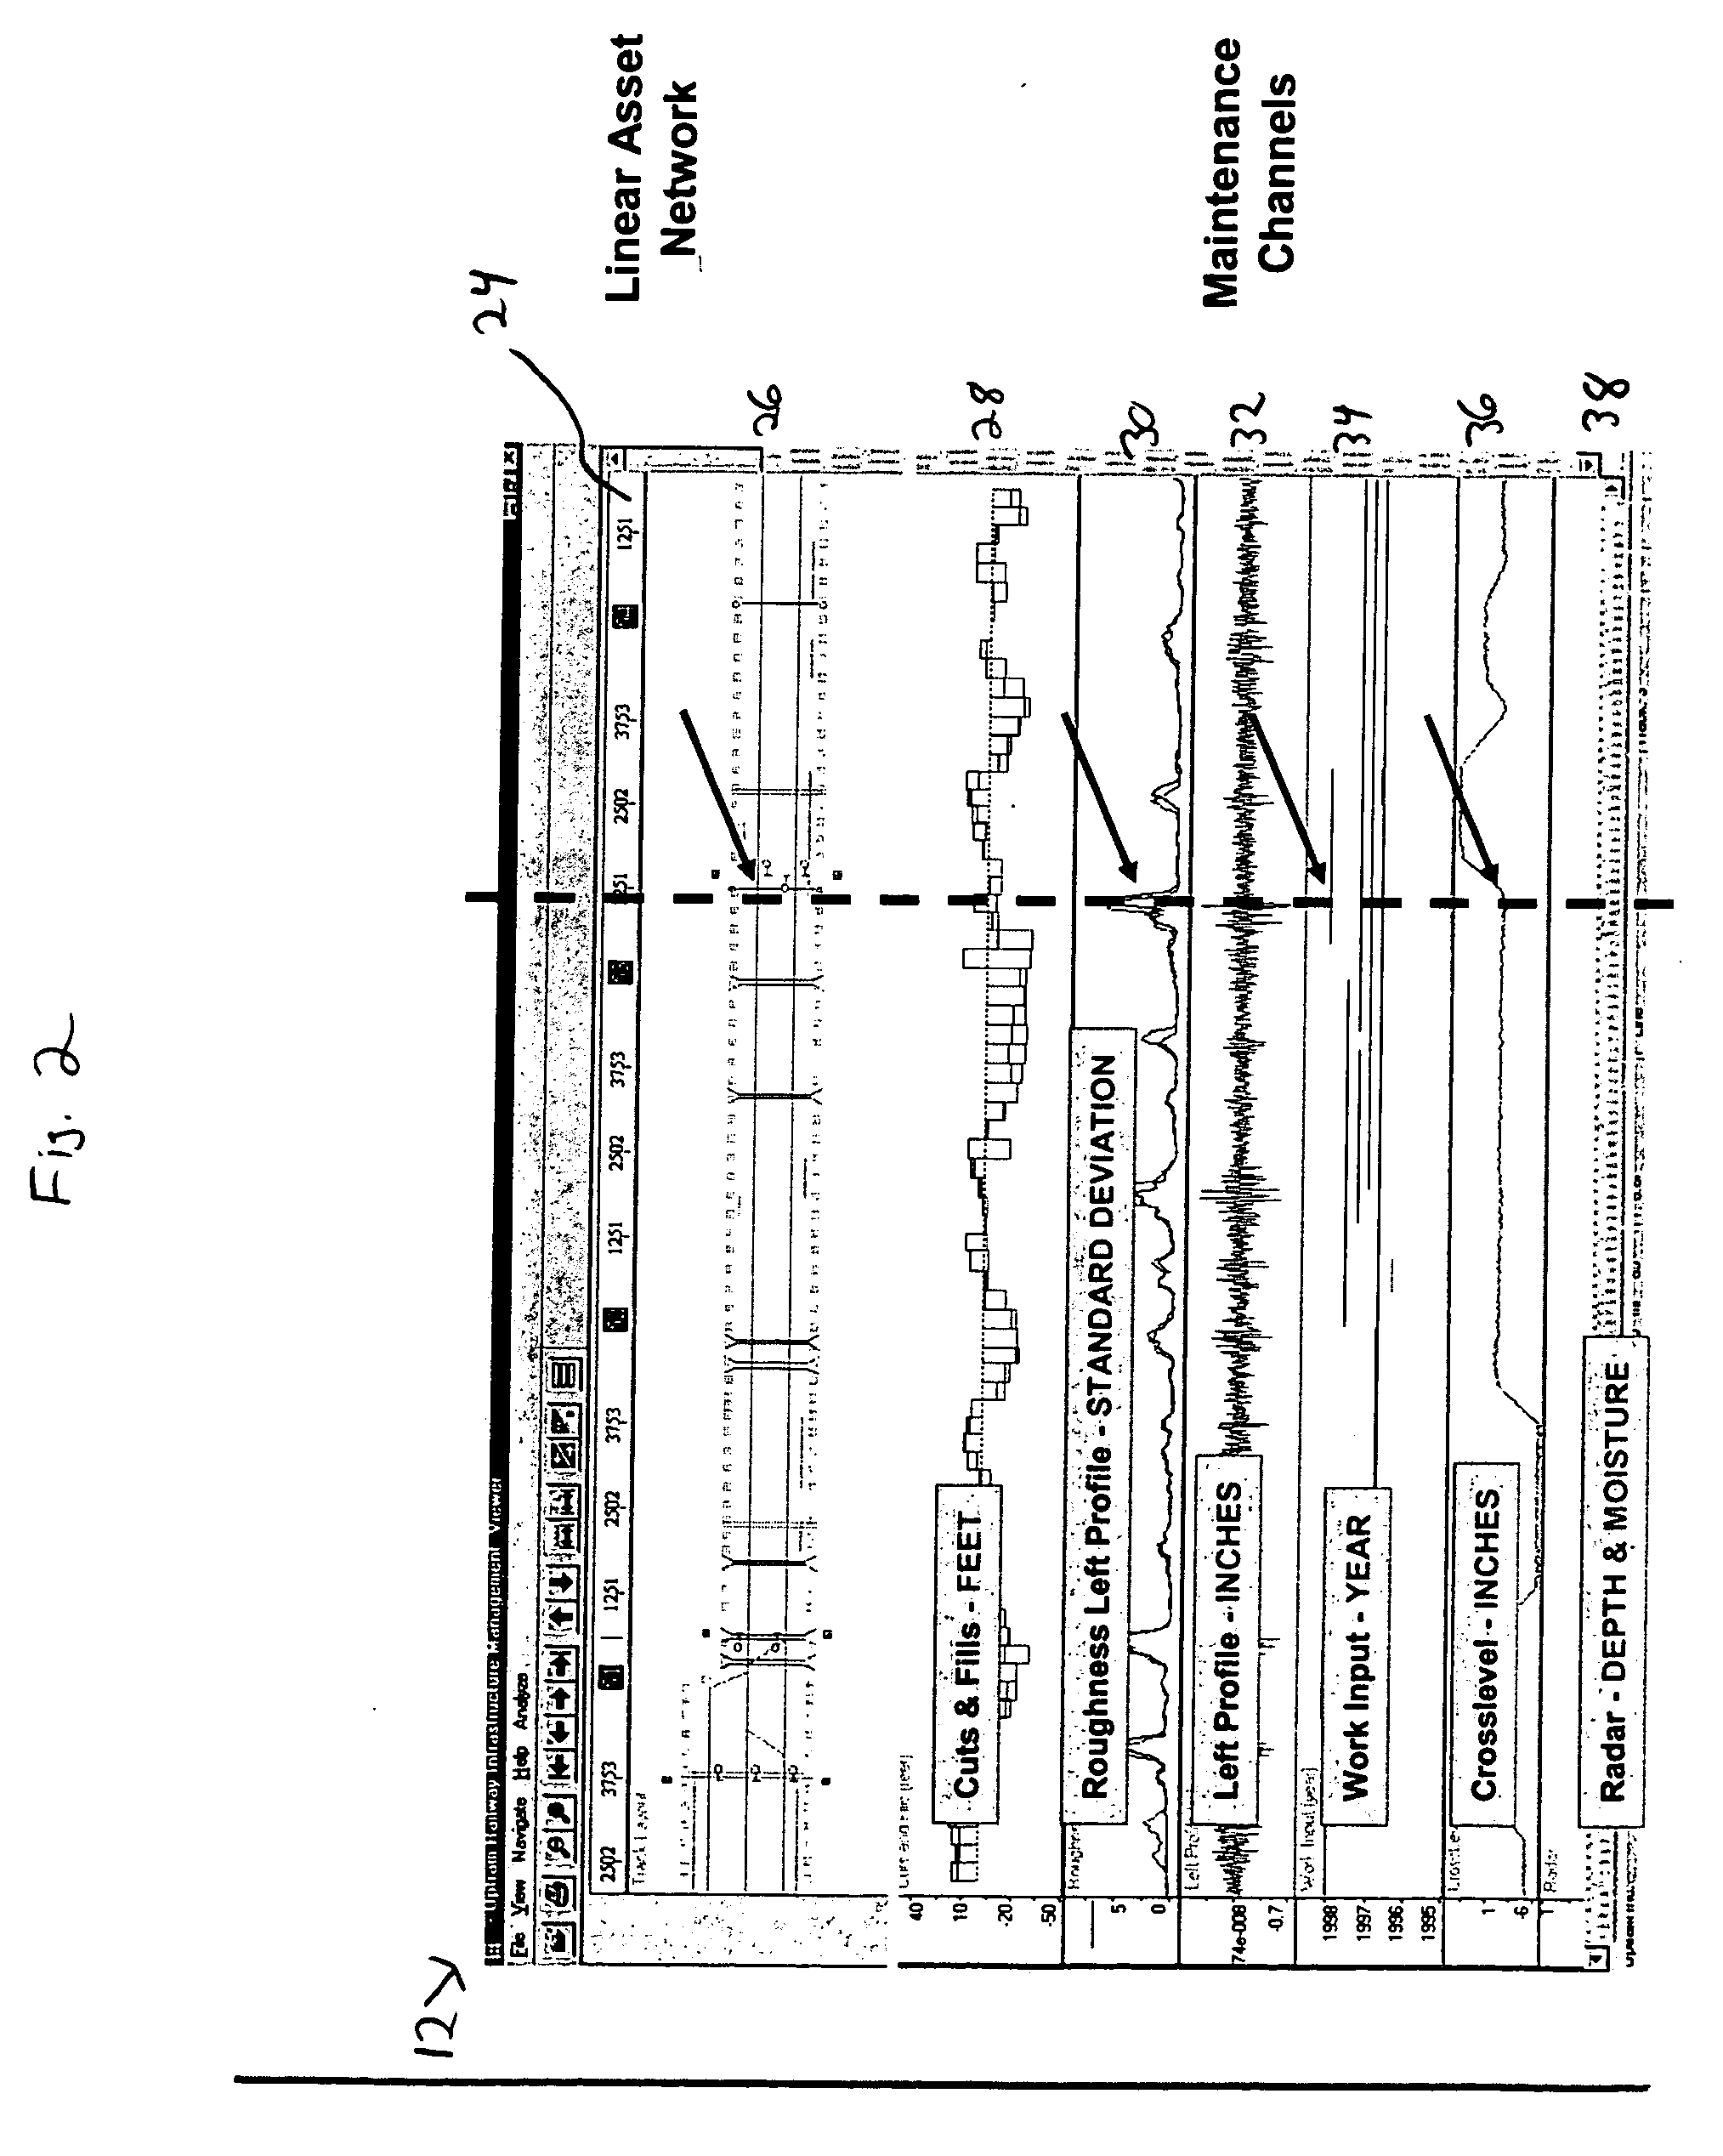 Method and system for analyzing linear engineering information